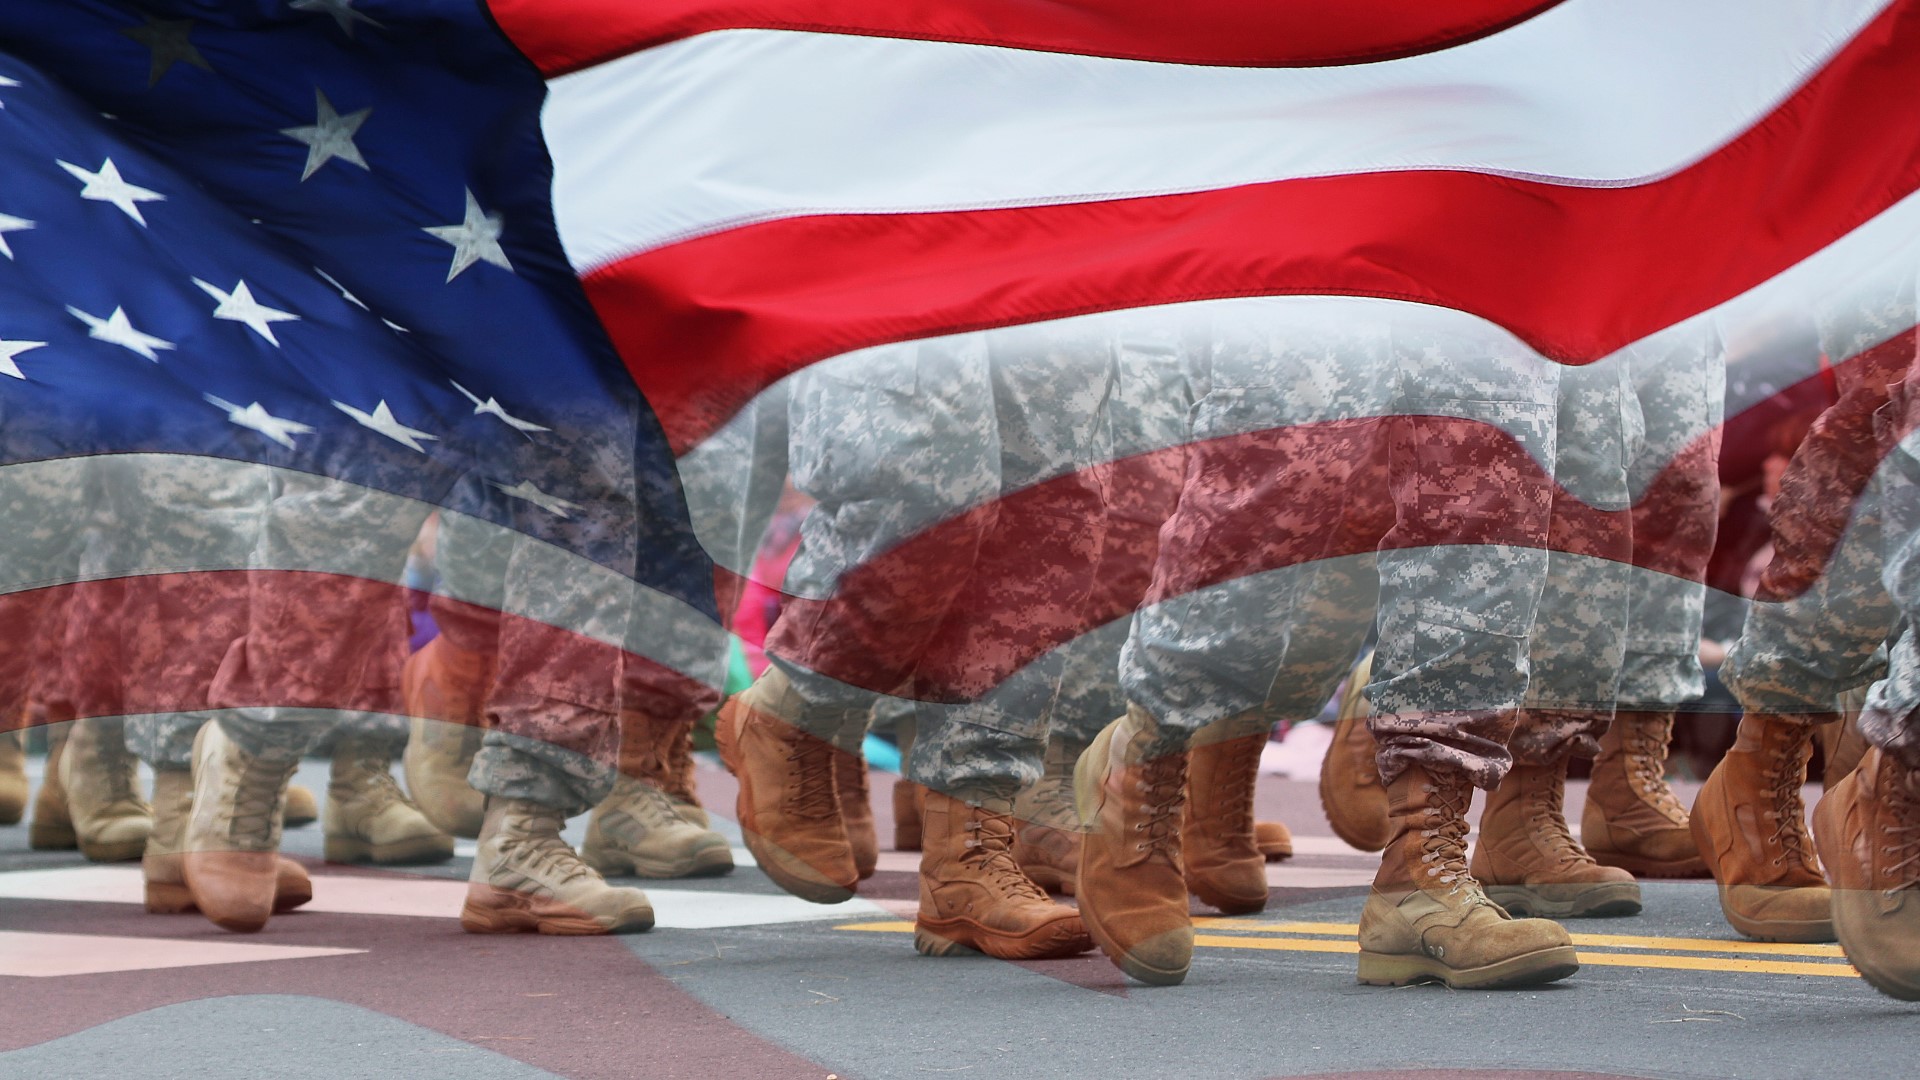 The Tampa Bay area is home to nearly 100,000 veterans.